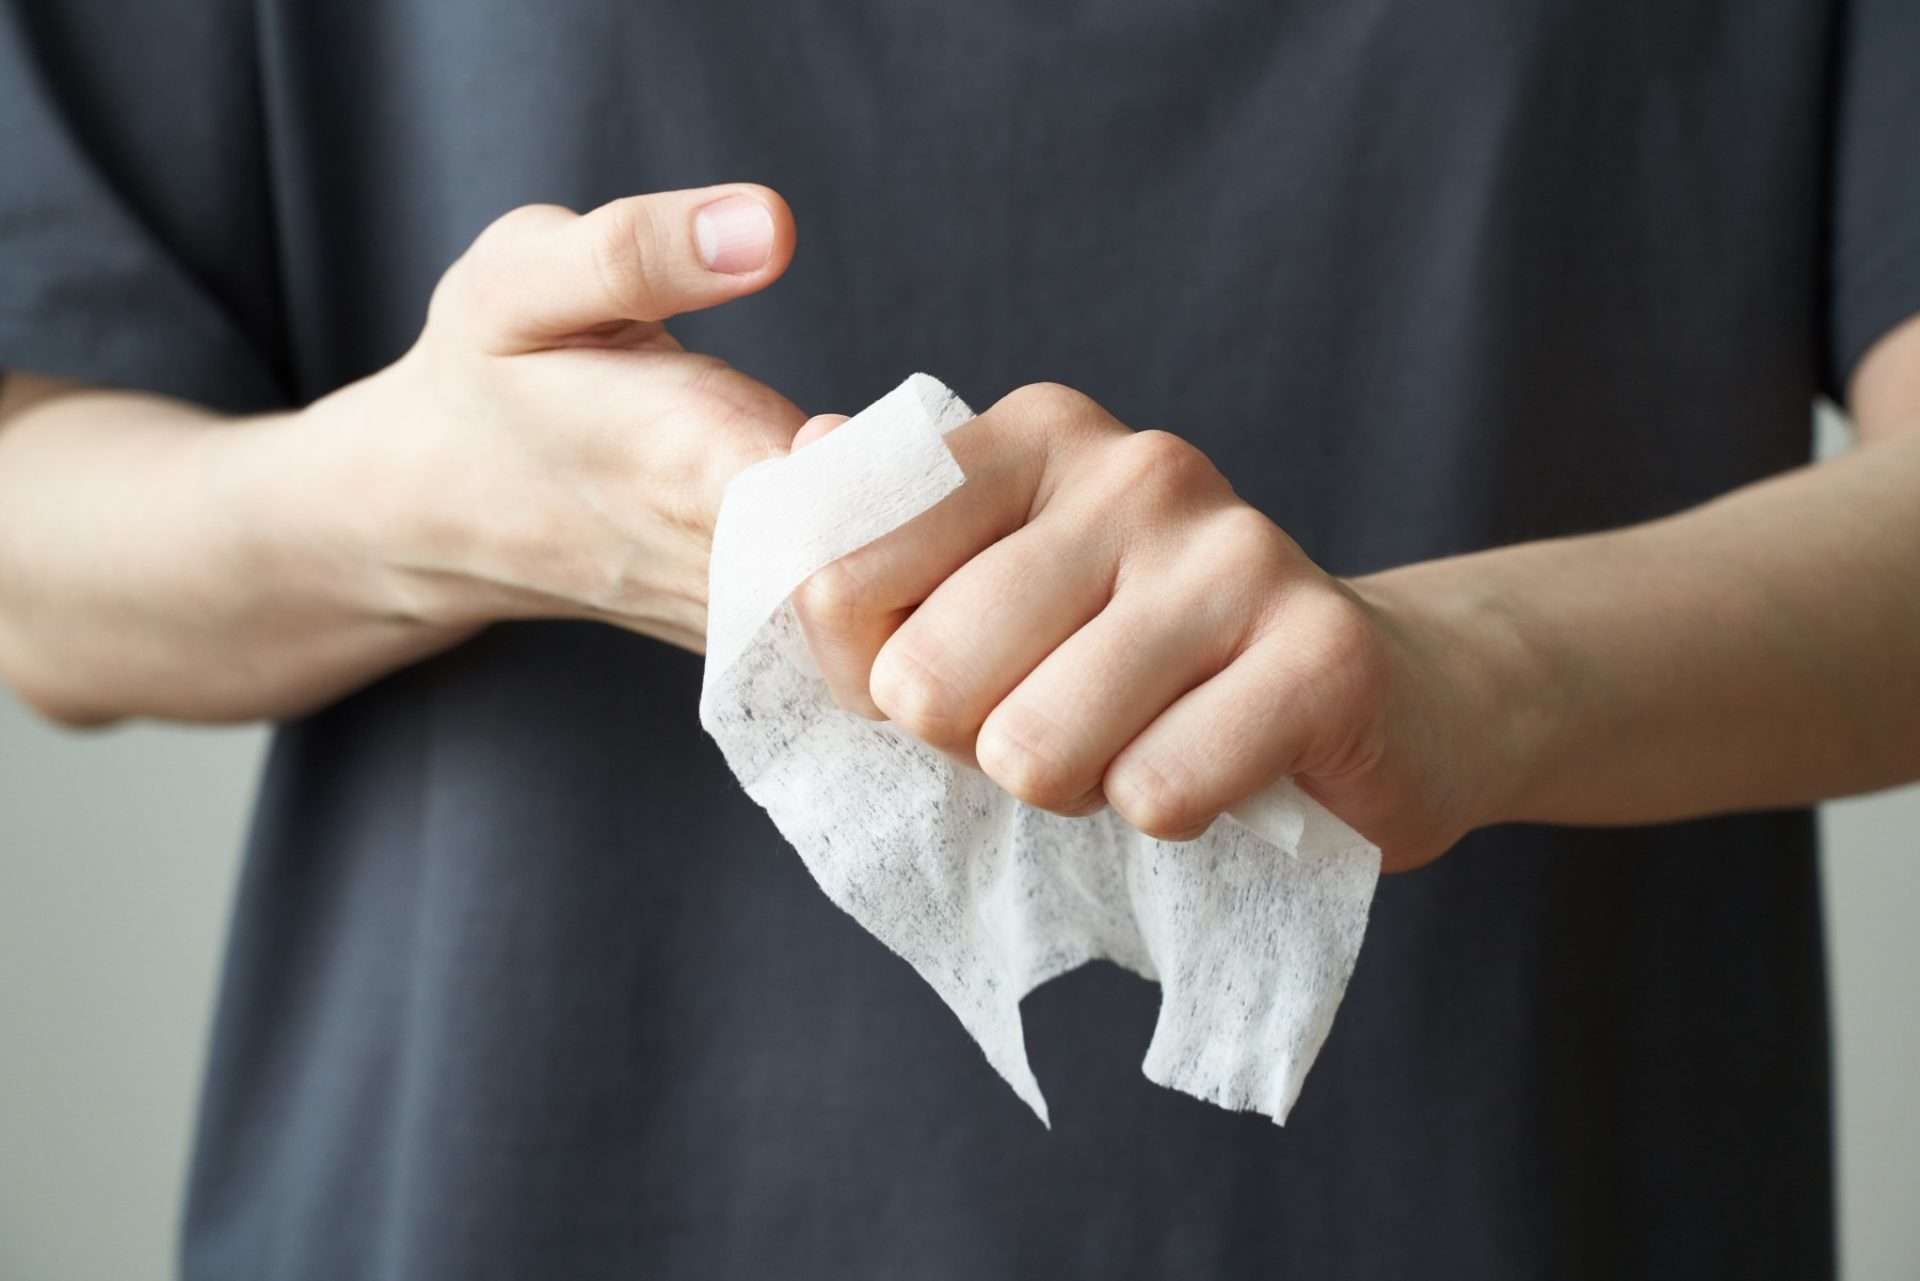 Person using wipe to clean hands.